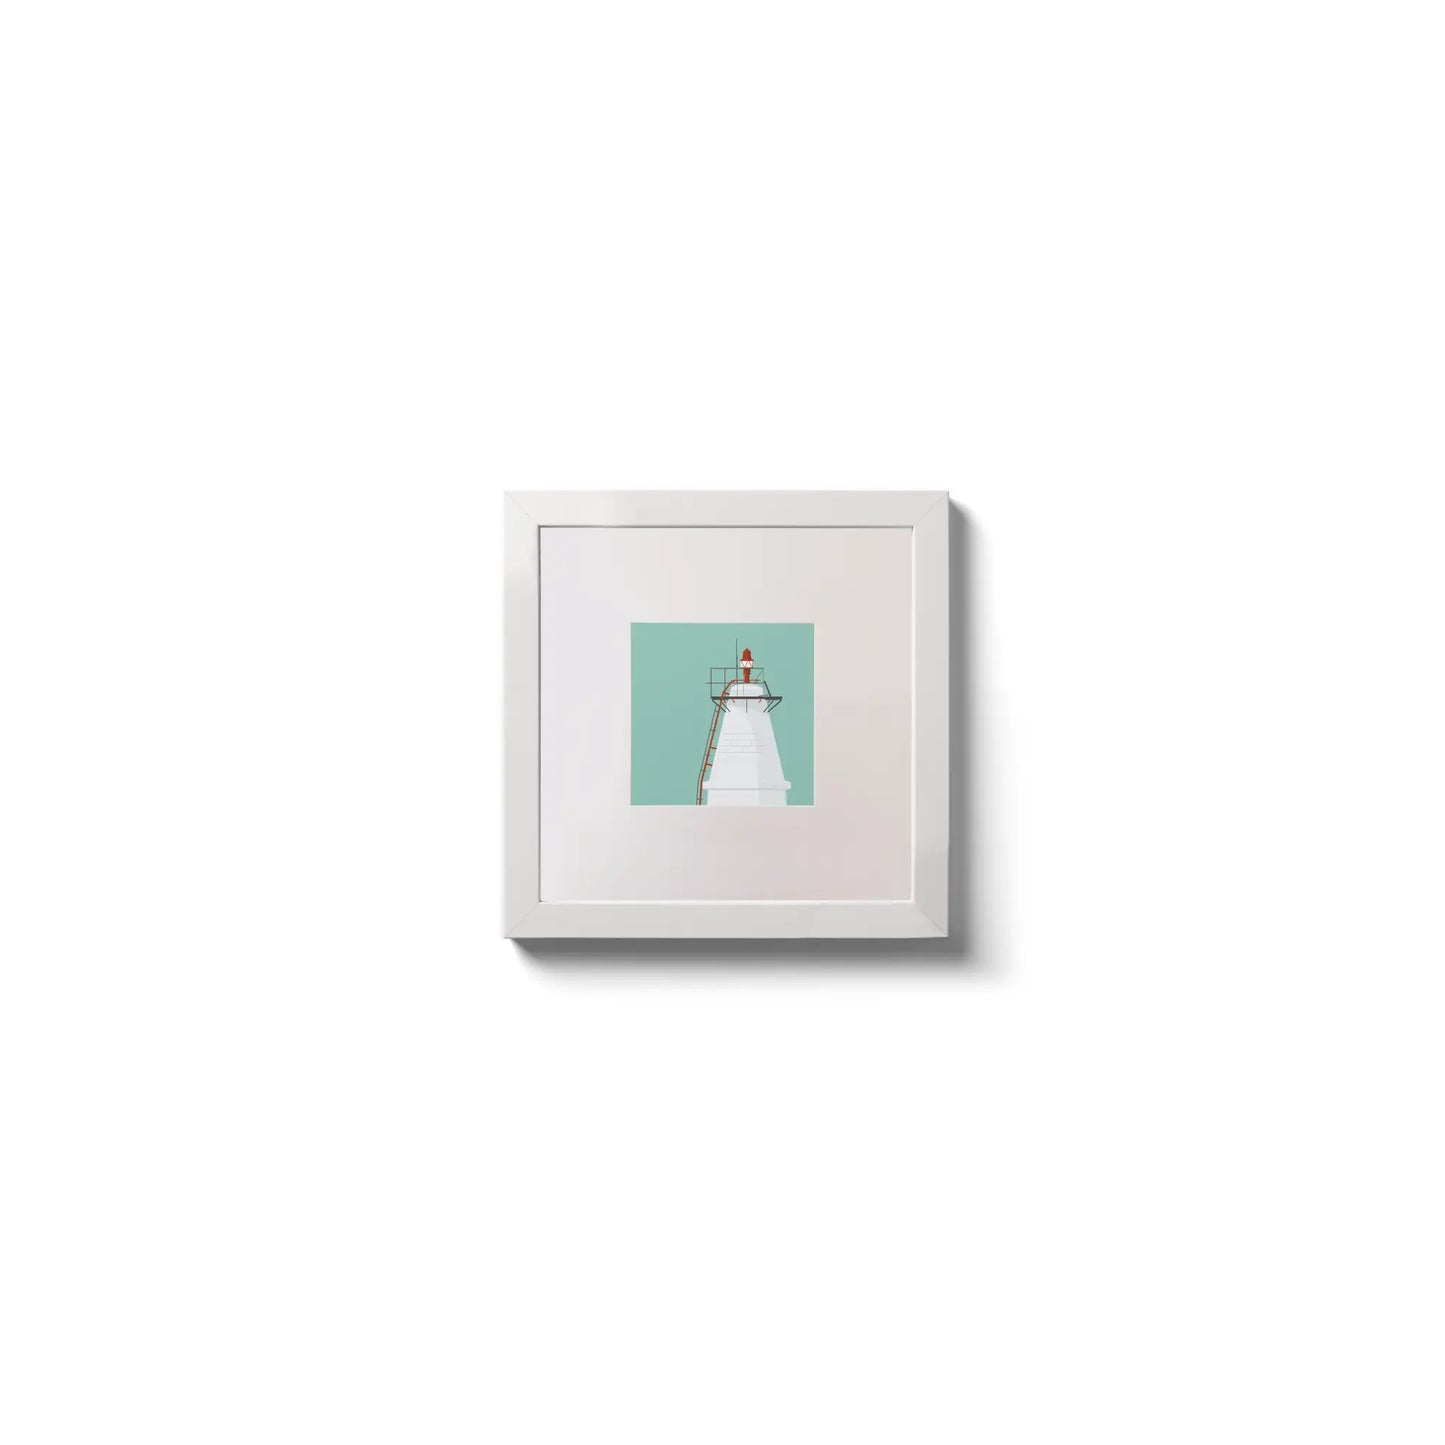 Illustration Copper Point lighthouse on an ocean green background,  in a white square frame measuring 10x10cm.